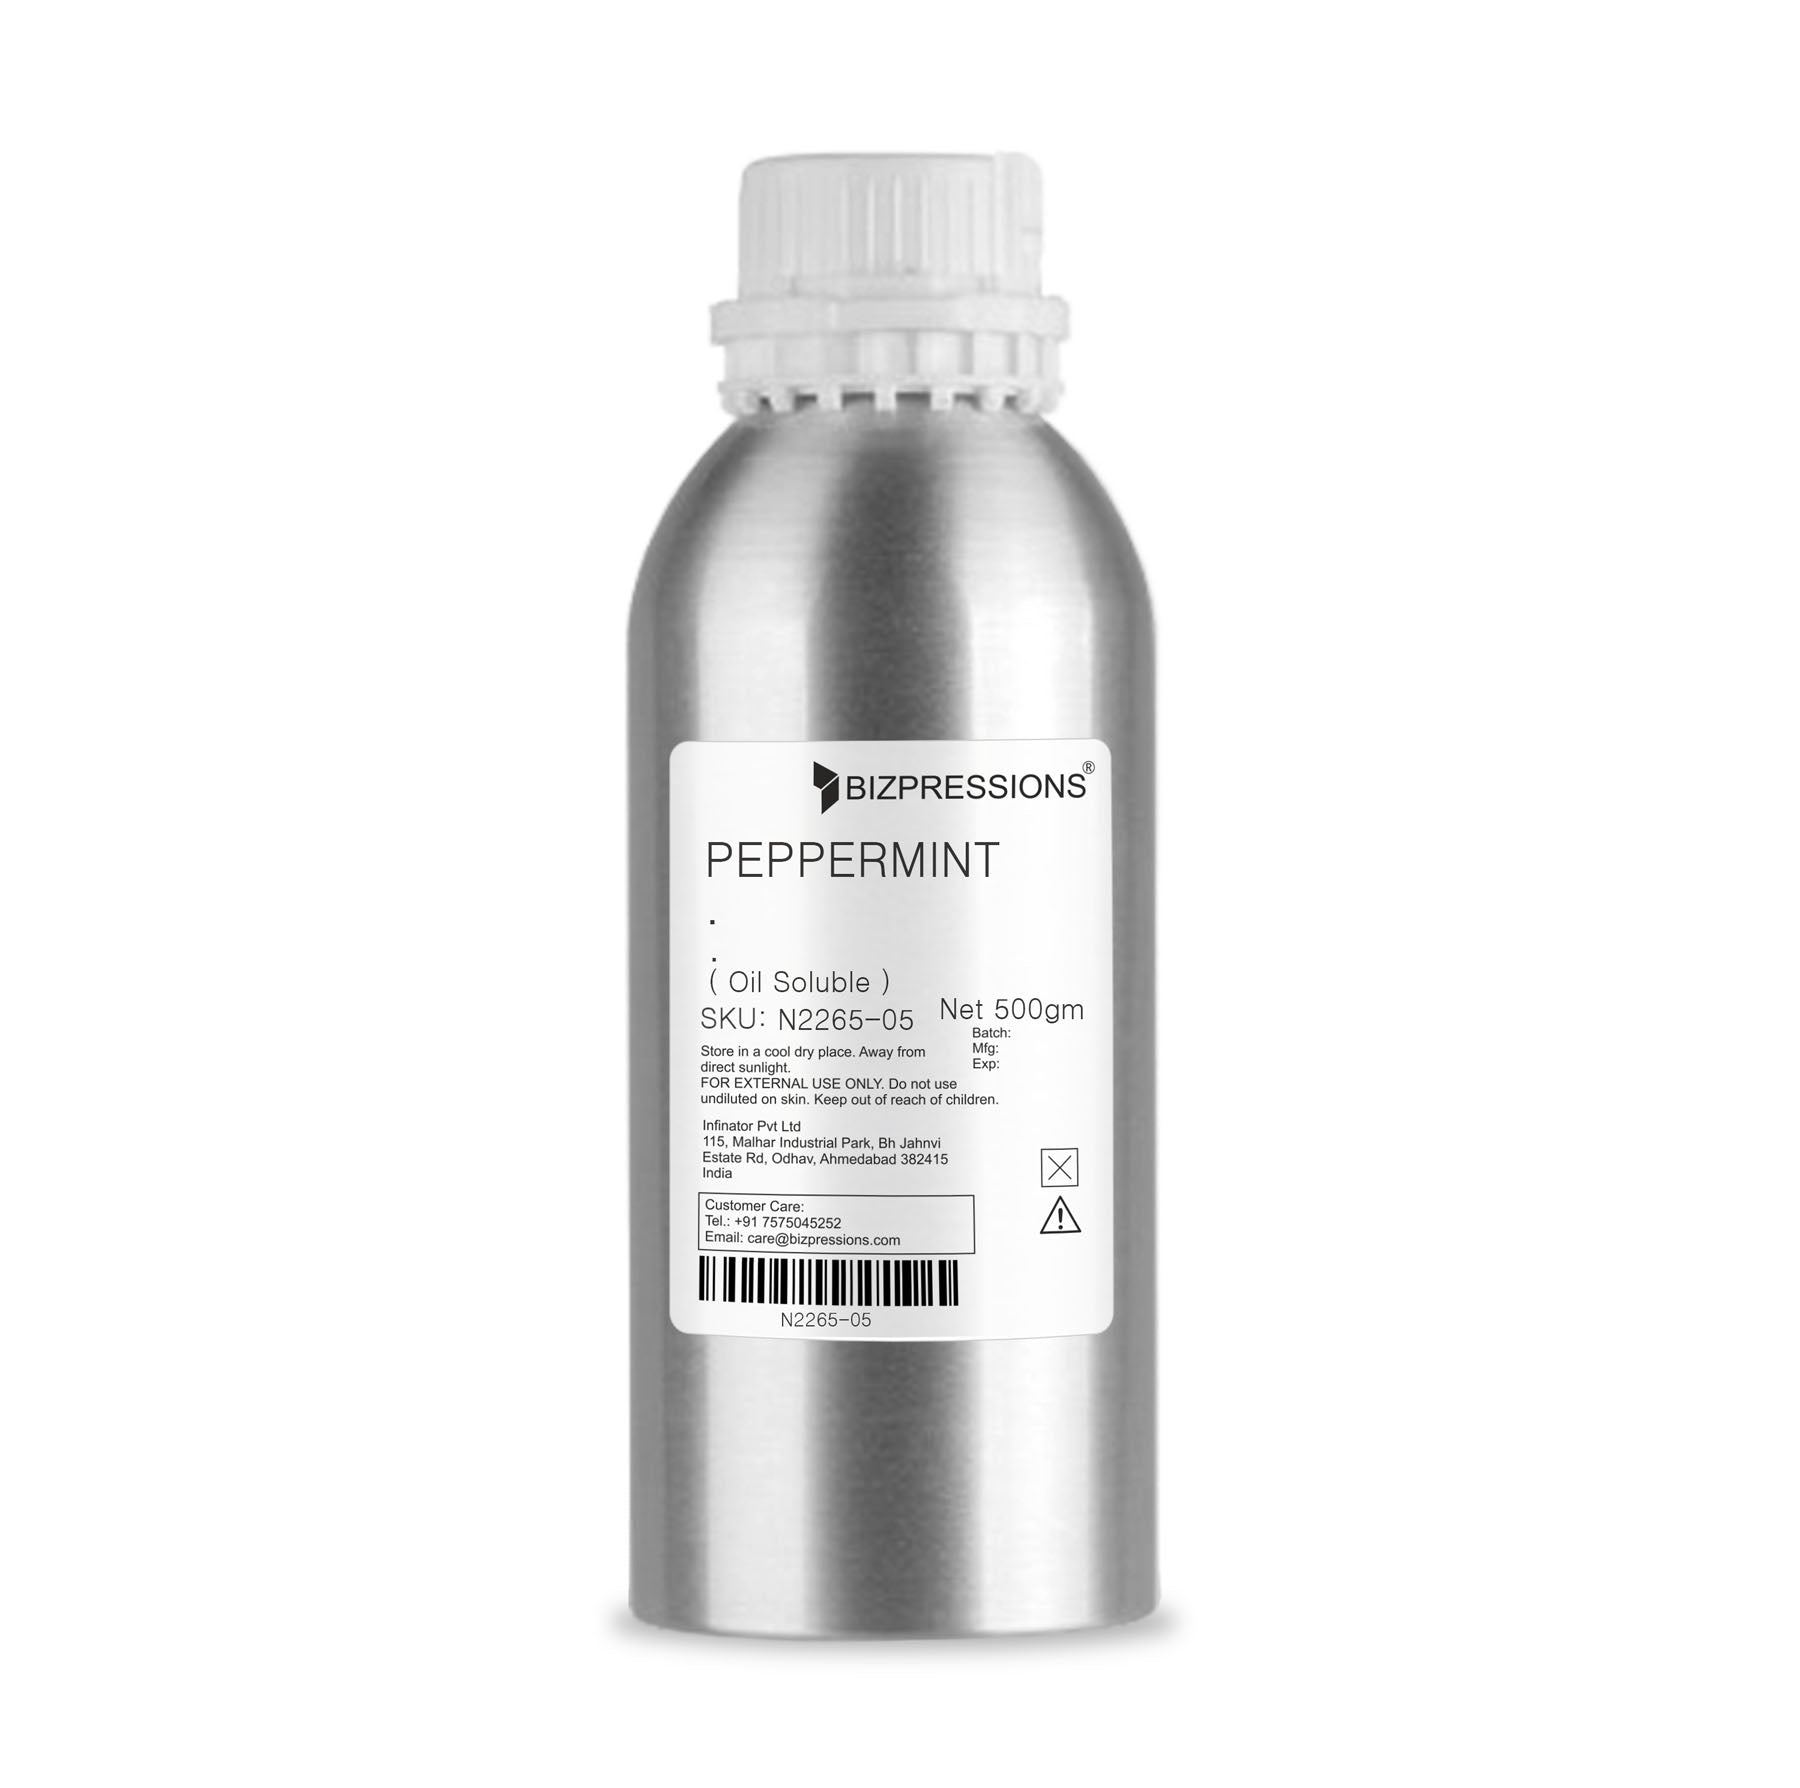 PEPPERMINT - Fragrance ( Oil Soluble ) - 500 gm